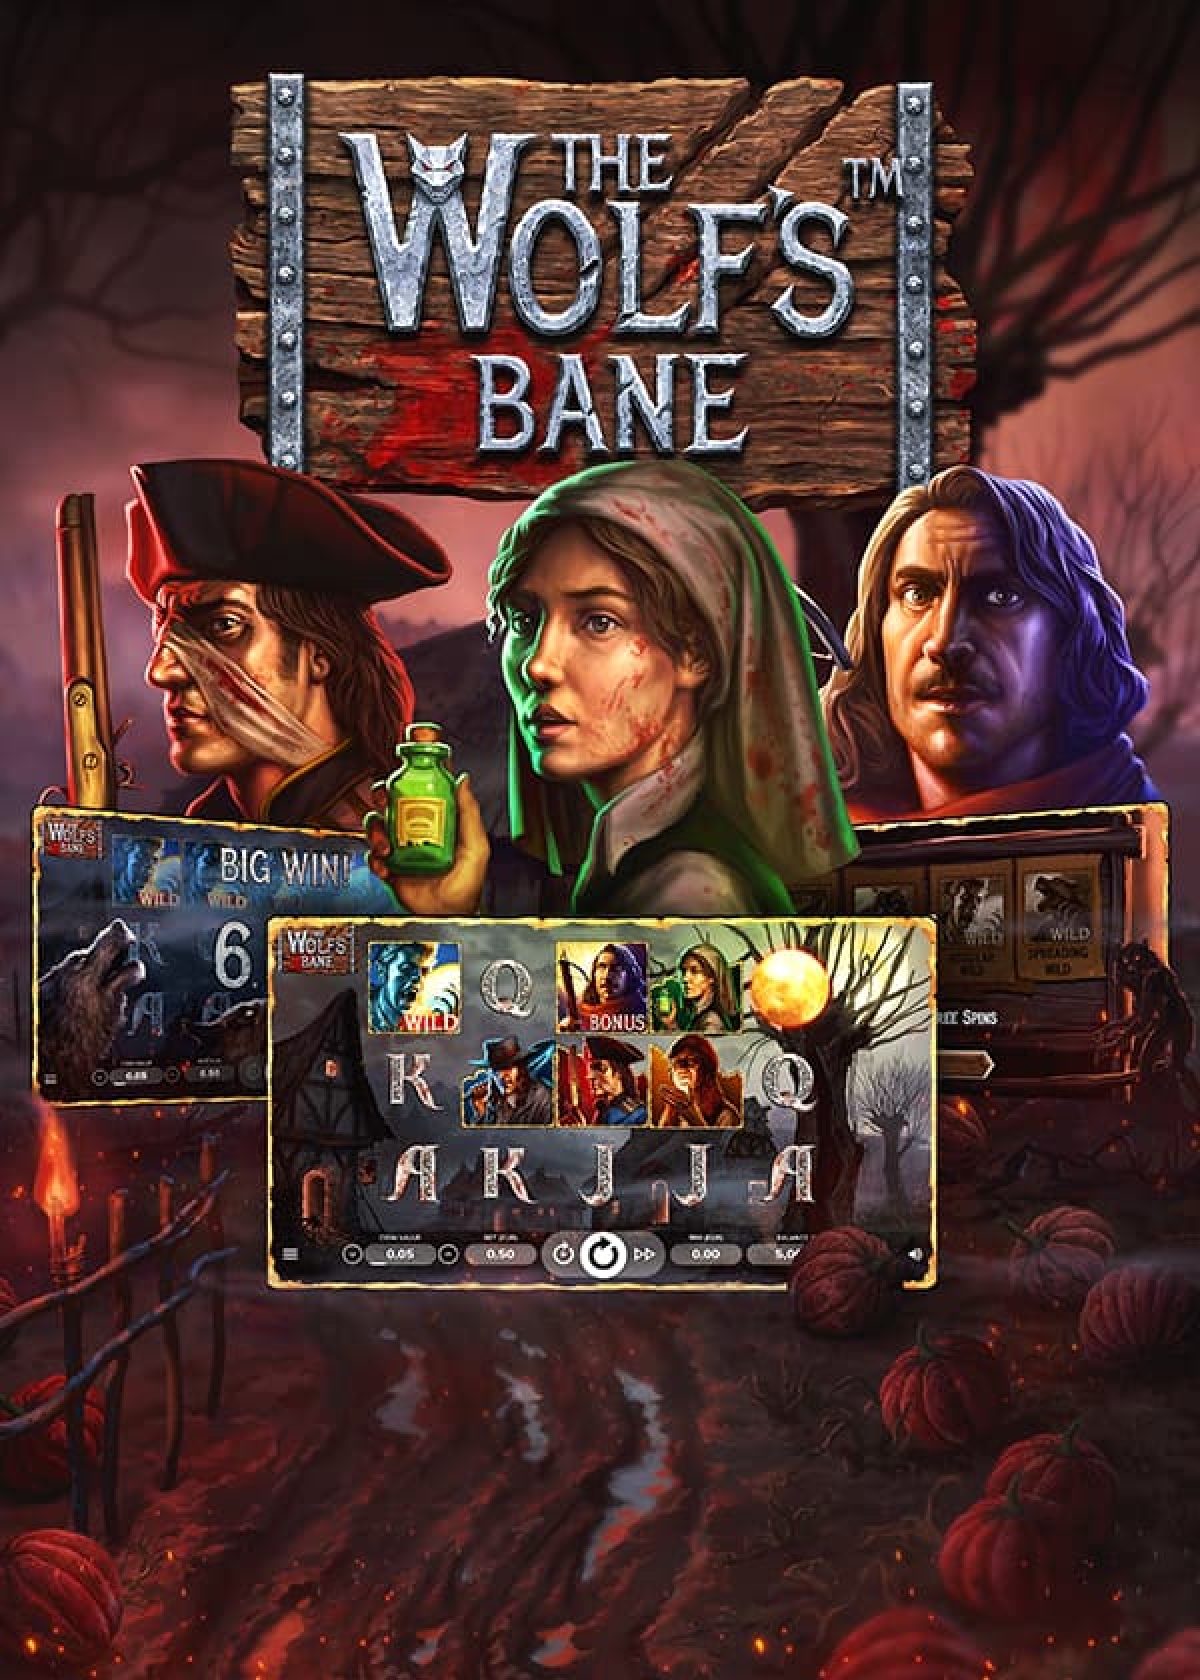 The Wolf's Bane demo